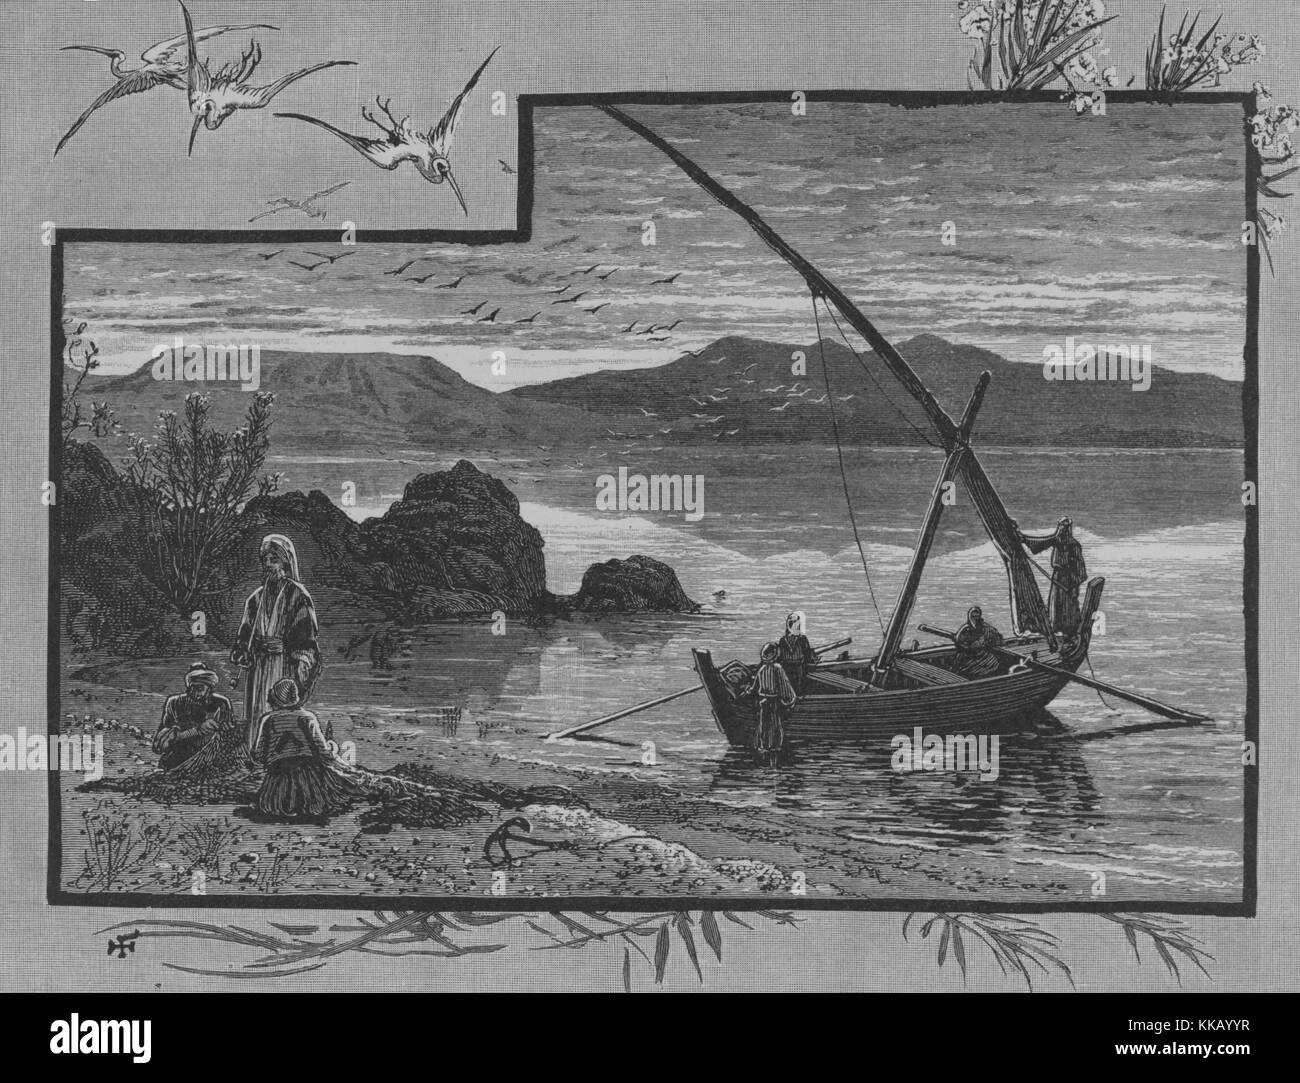 Wood engraving depicting a lake, with men on the shore with a fishing net, and a small boat in the water, captioned 'On the shore of the lake, at Et Tabighah, the supposed site of Bethsaida, an oleander in full bloom grows among the rocks, and storks are characteristically hovering over the lake', from the book 'Picturesque Palestine, Sinai, and Egypt', by Sir Charles William Wilson, 1882. From the New York Public Library. Stock Photo